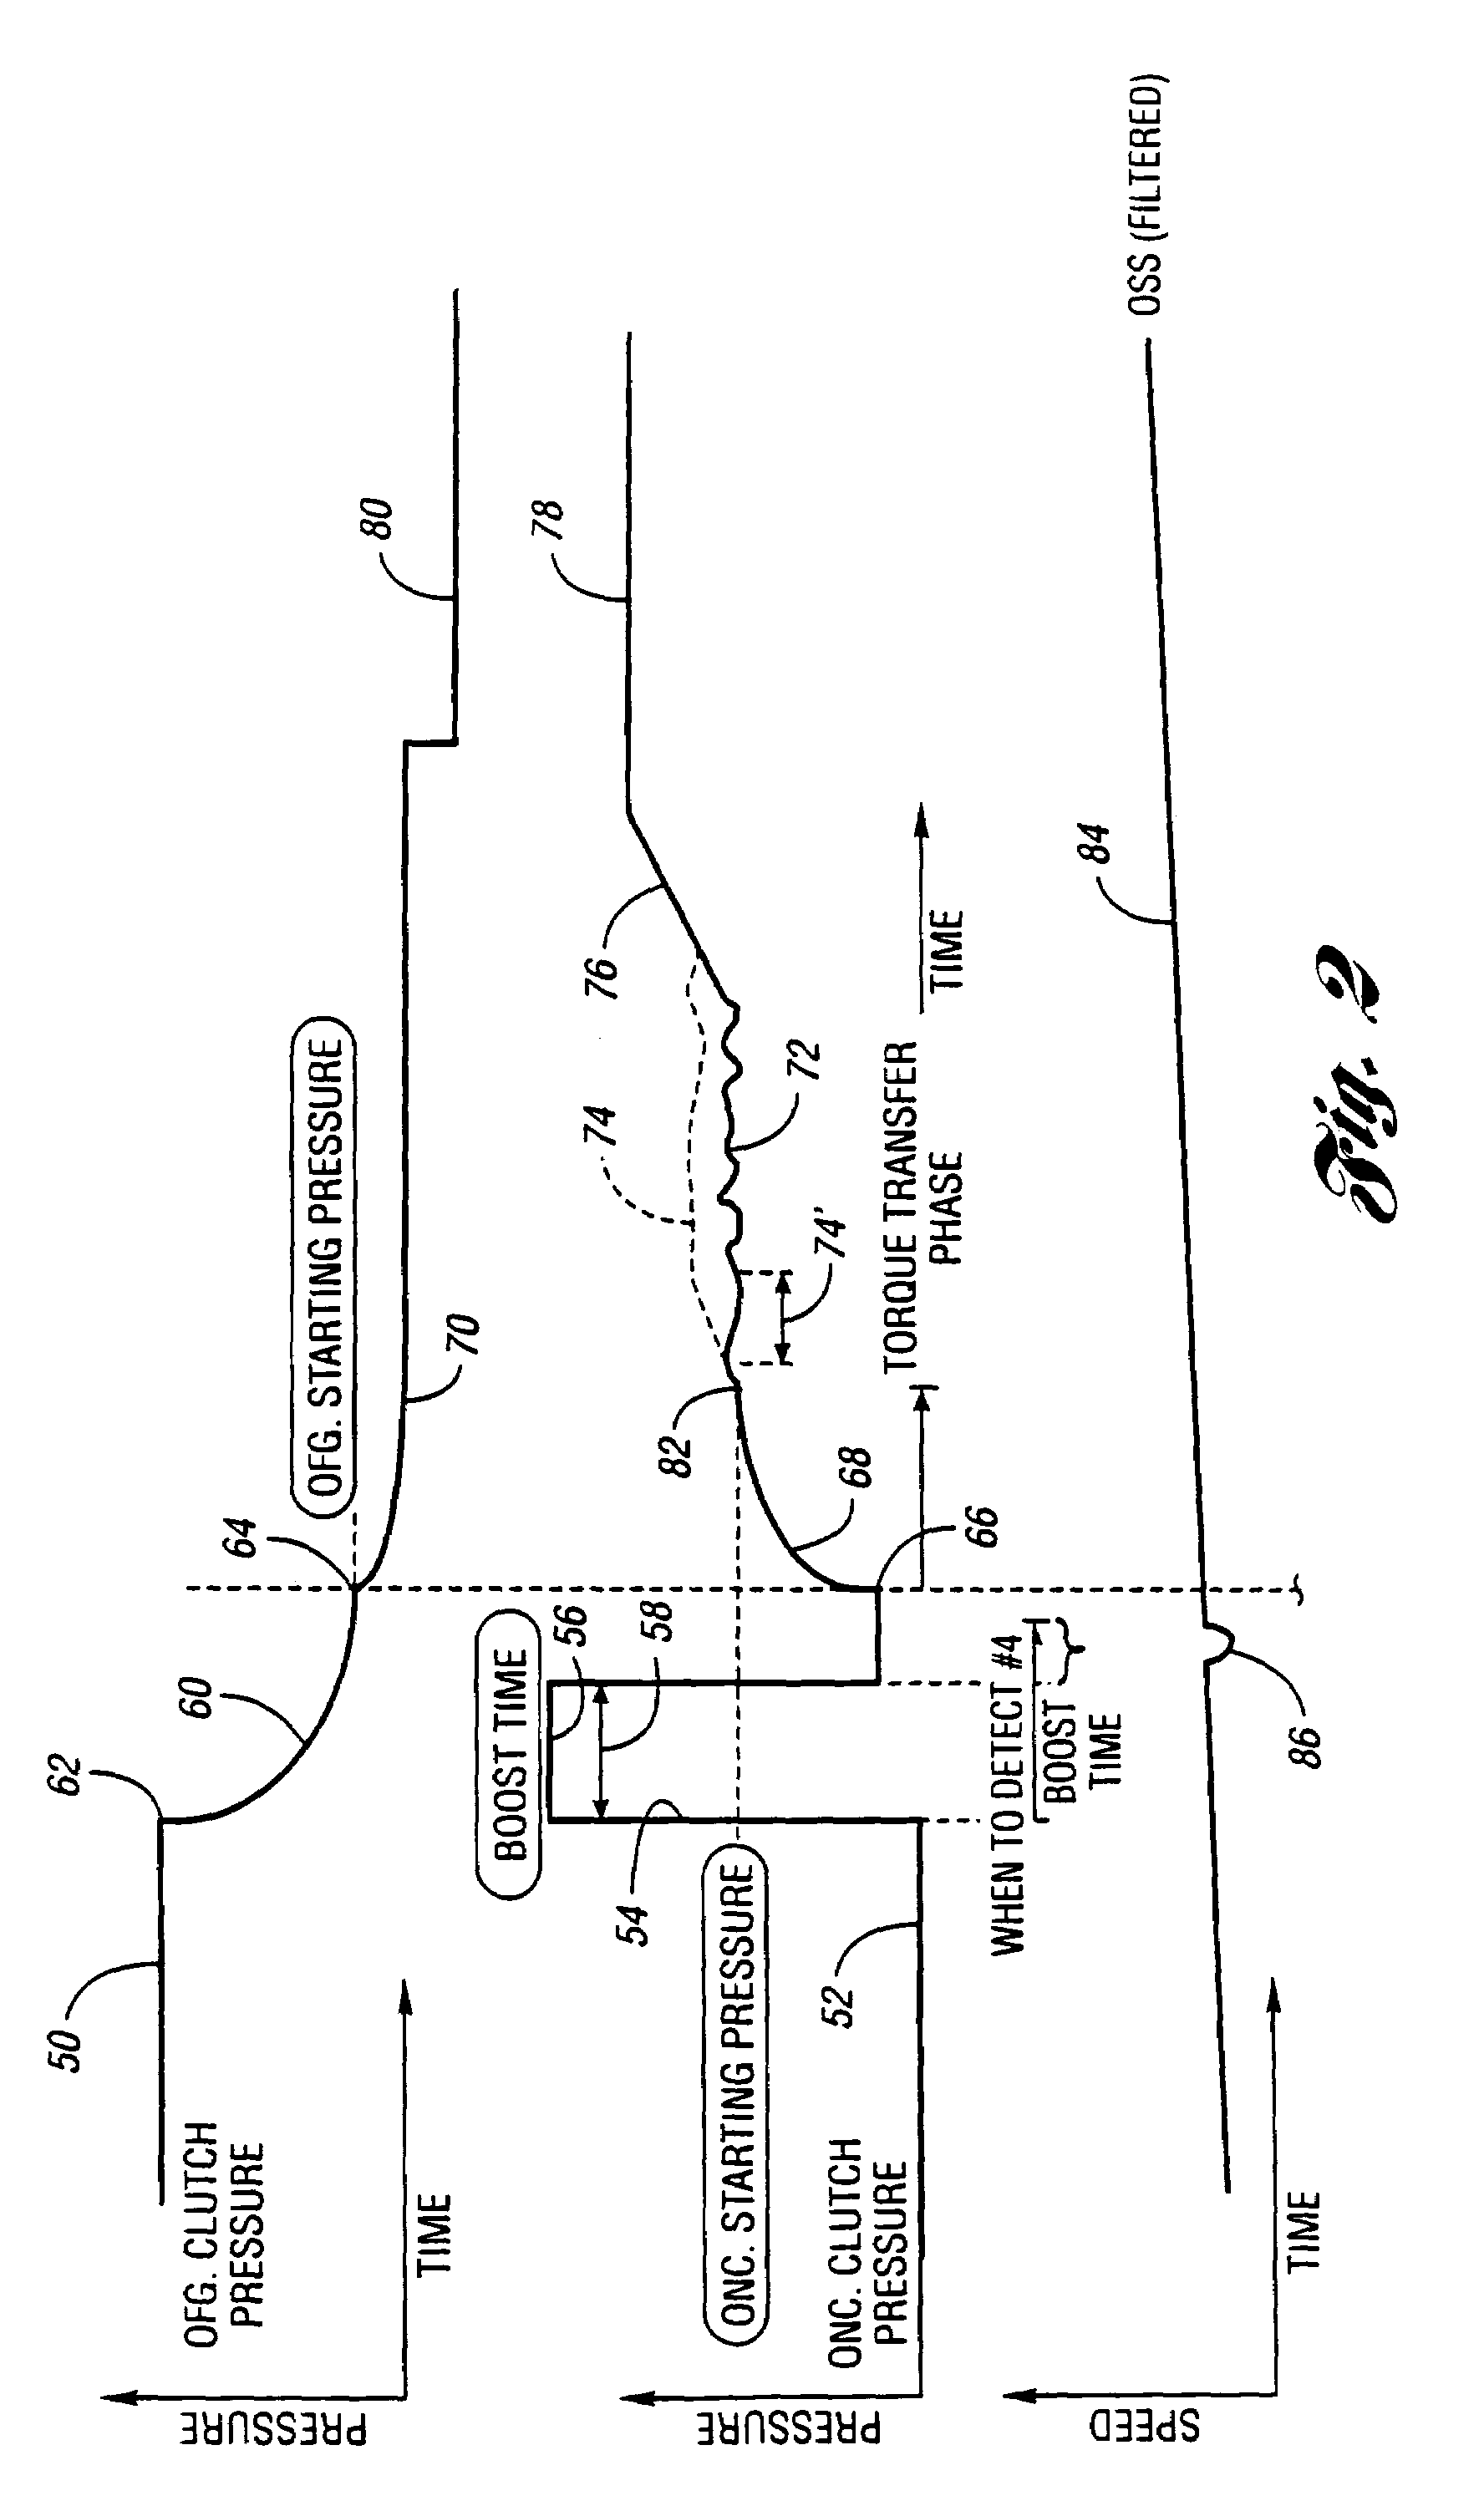 Adaptive pressure control method for achieving synchronous upshifts in a multiple-ratio transmission